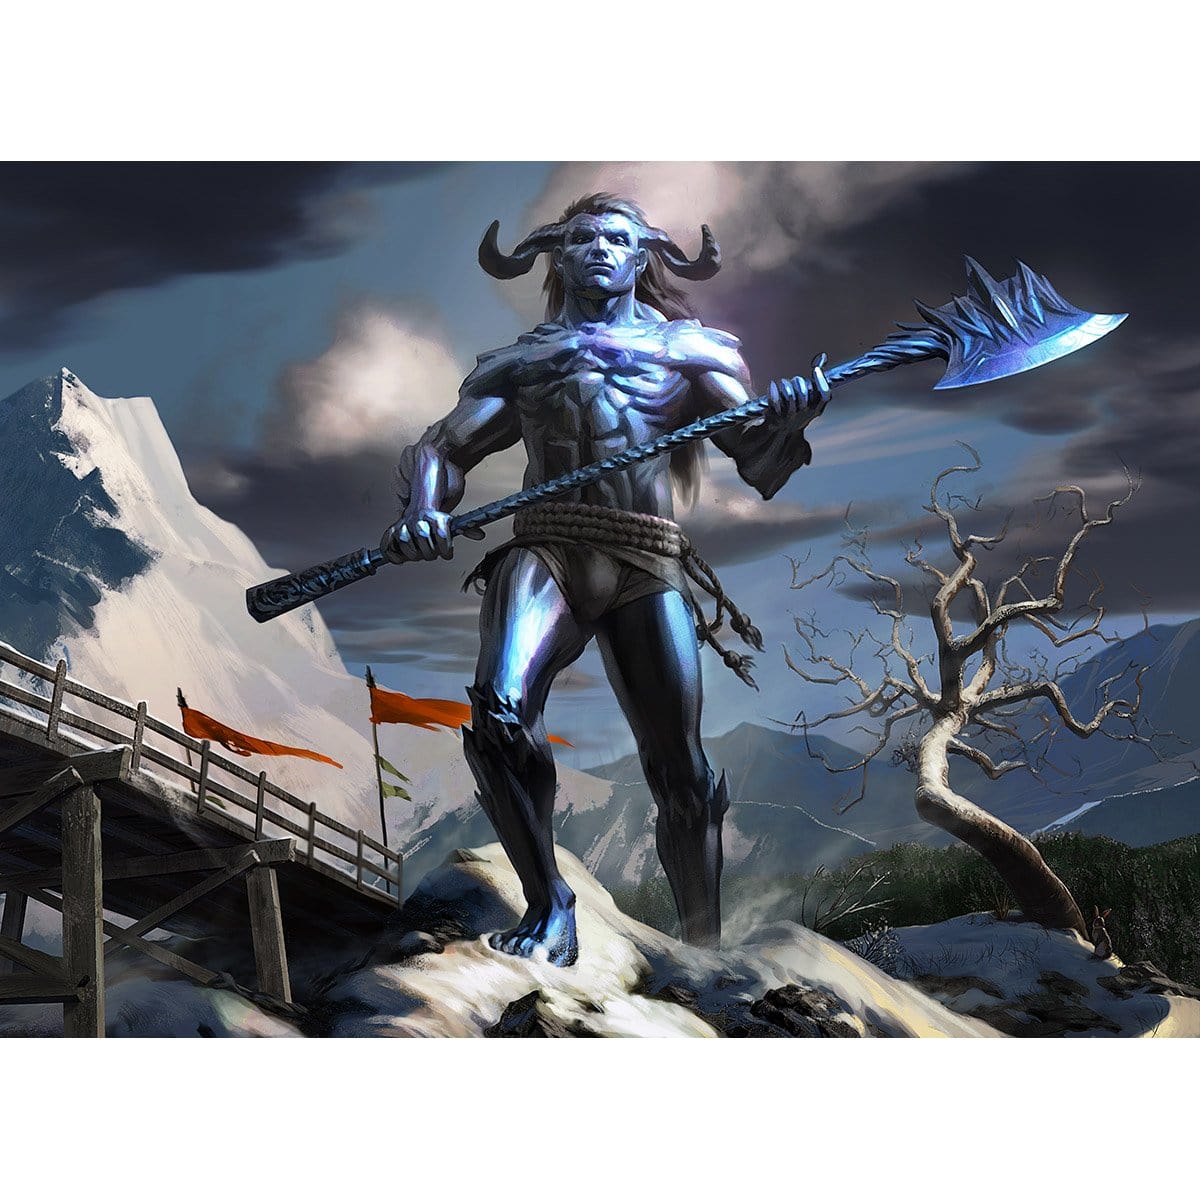 Frost Titan Print - Print - Original Magic Art - Accessories for Magic the Gathering and other card games